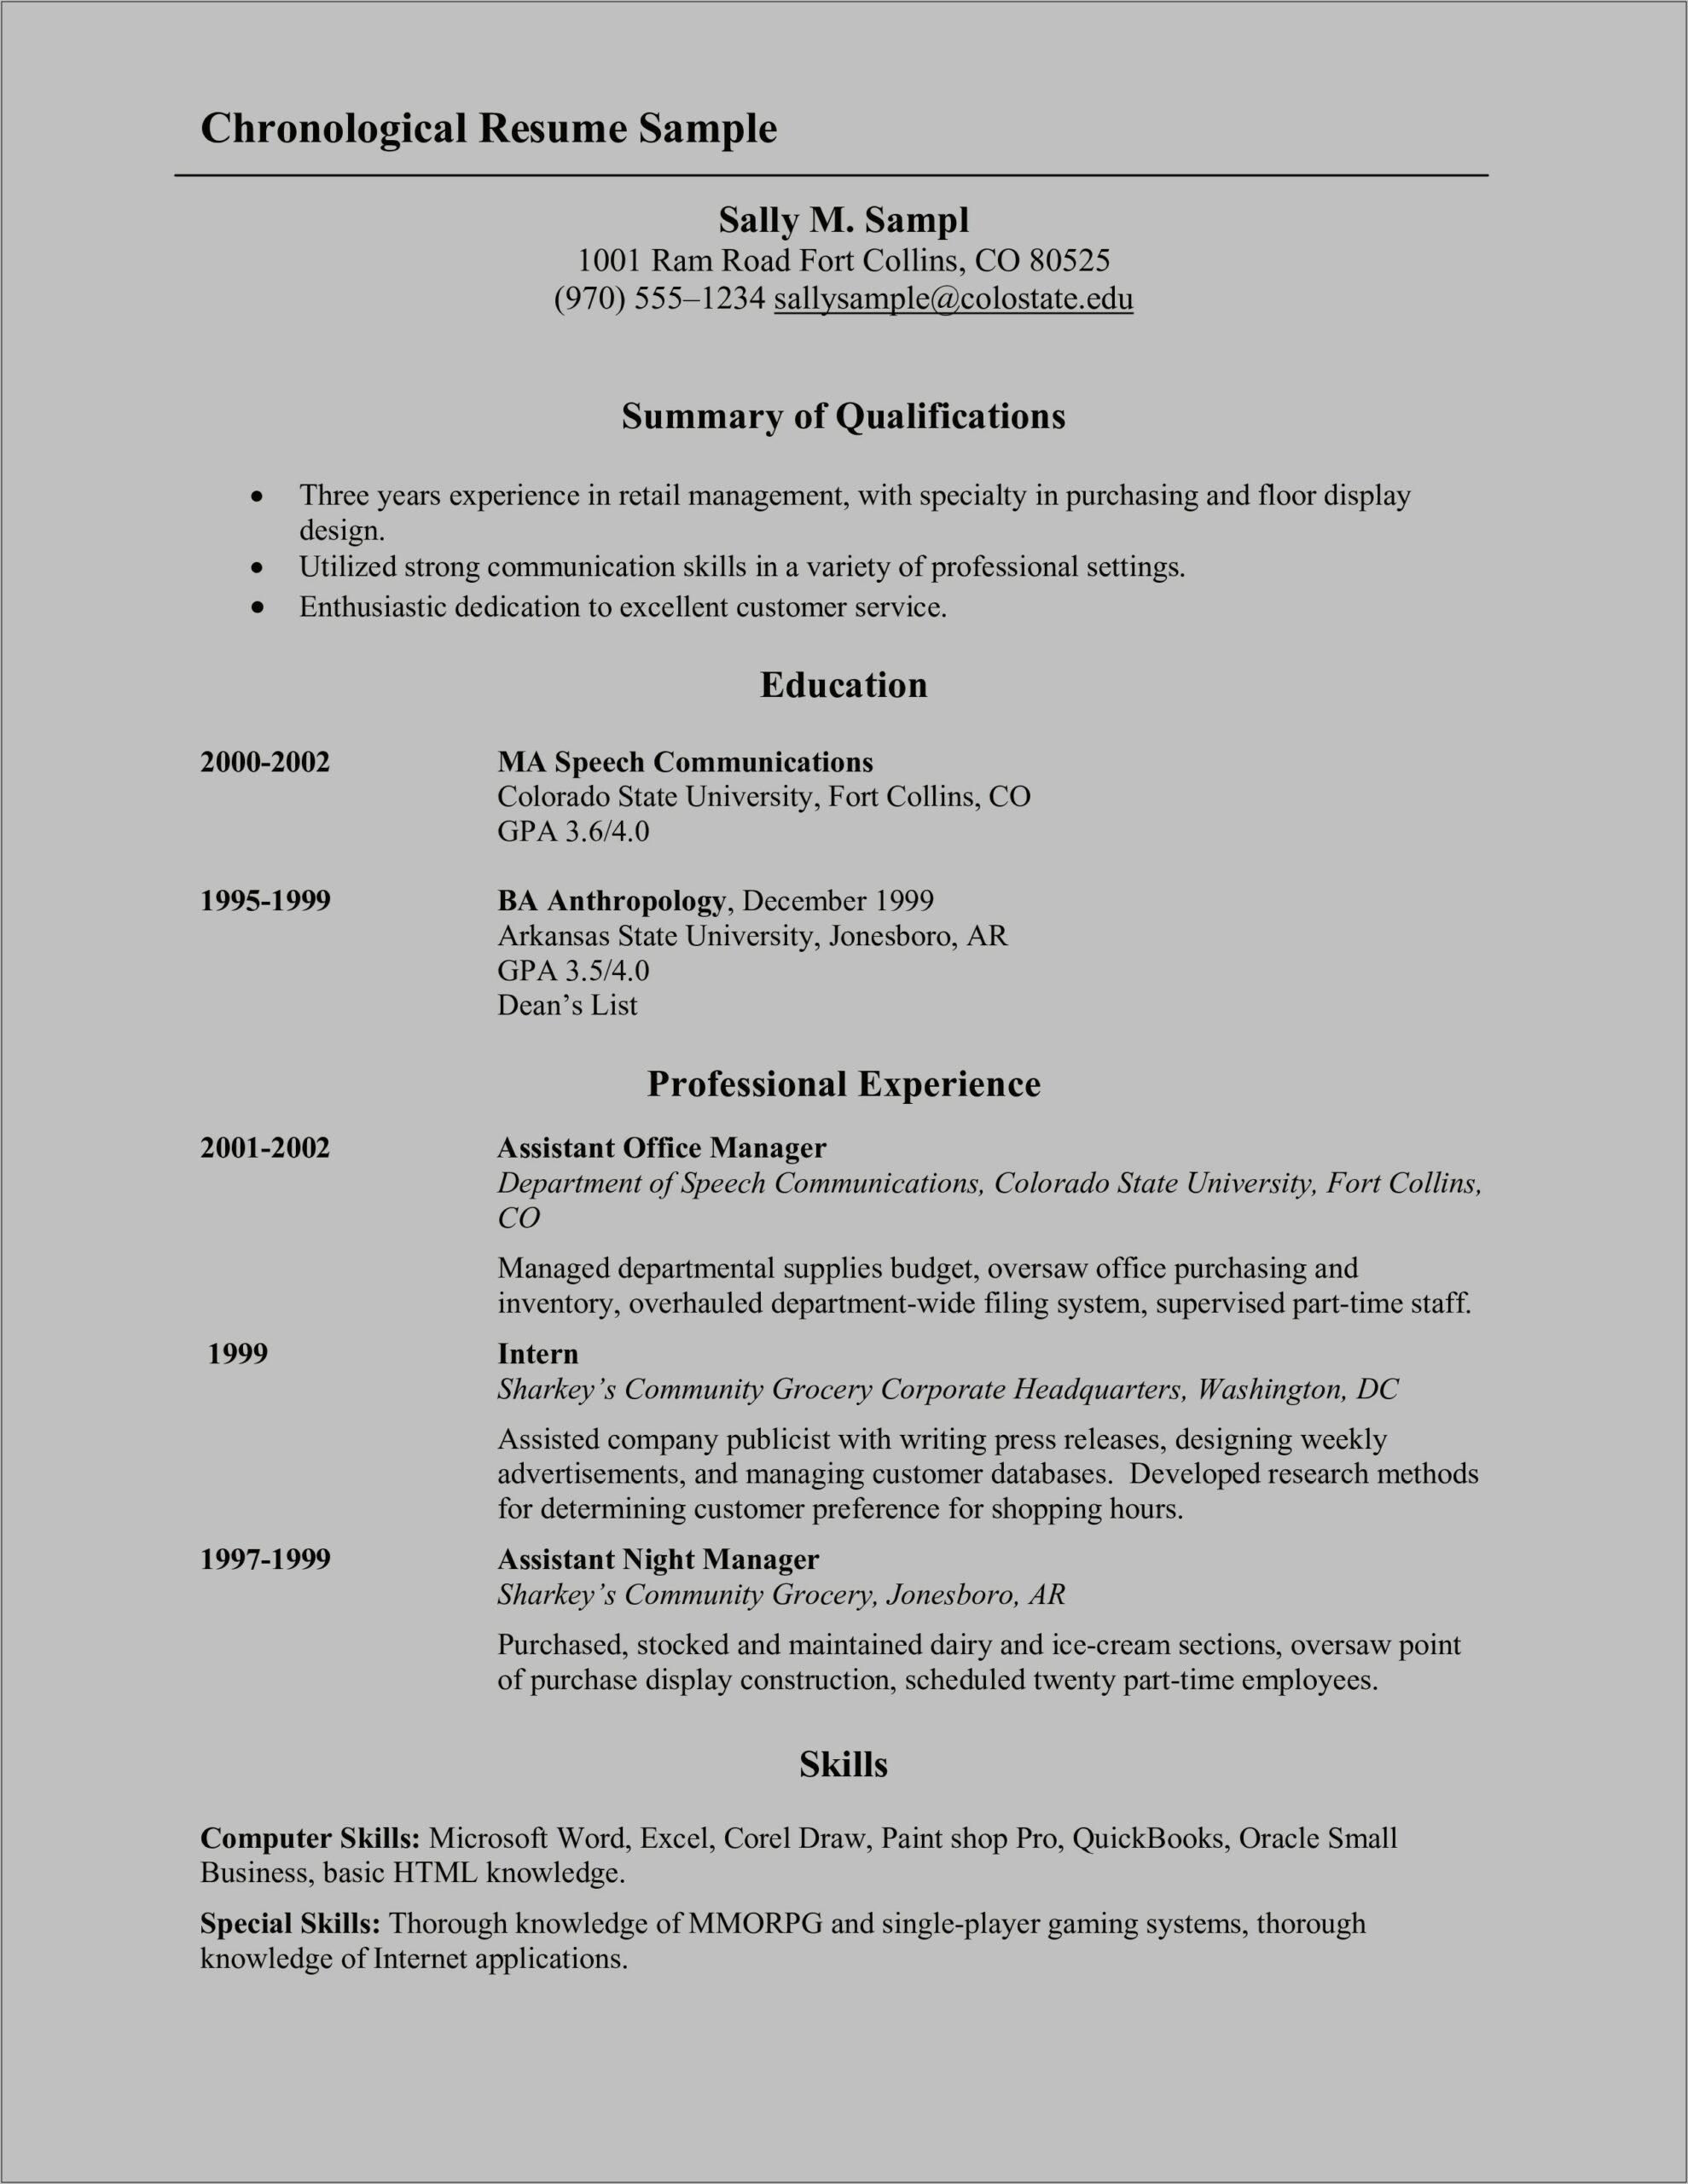 A Sample Of A Chronological Resume